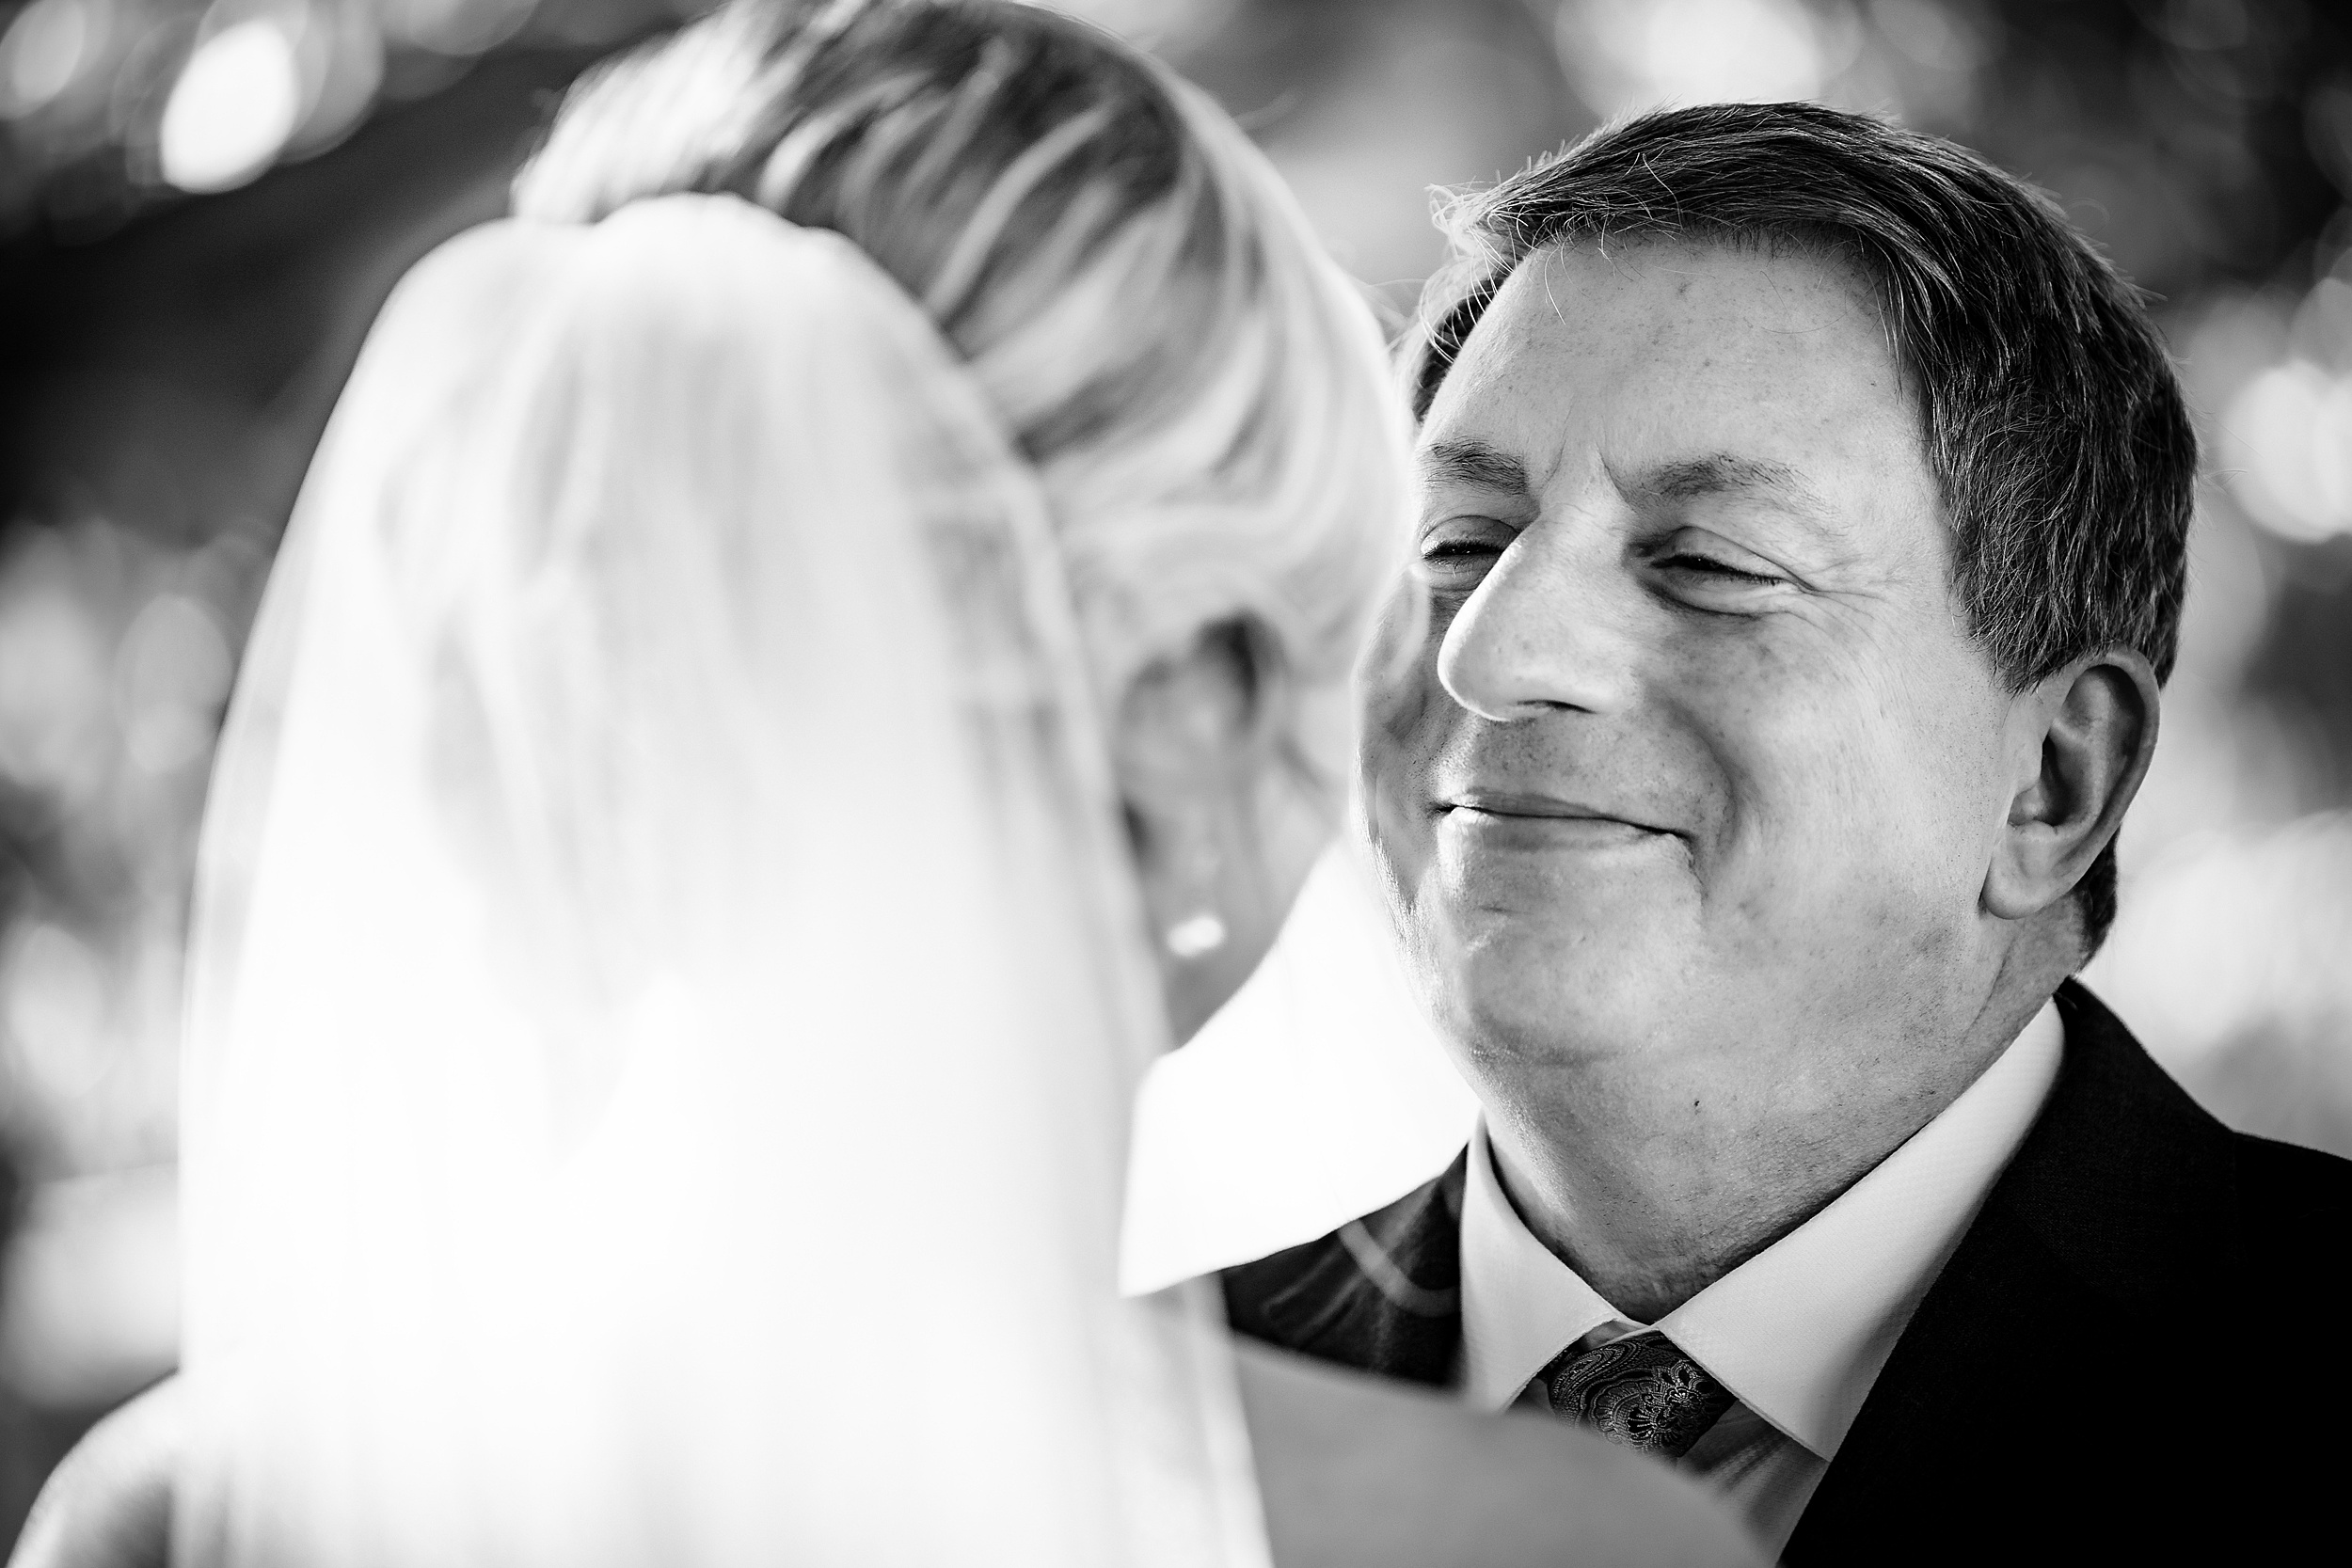 Newlyweds smile while leaning in for a kiss at their alfond inn wedding